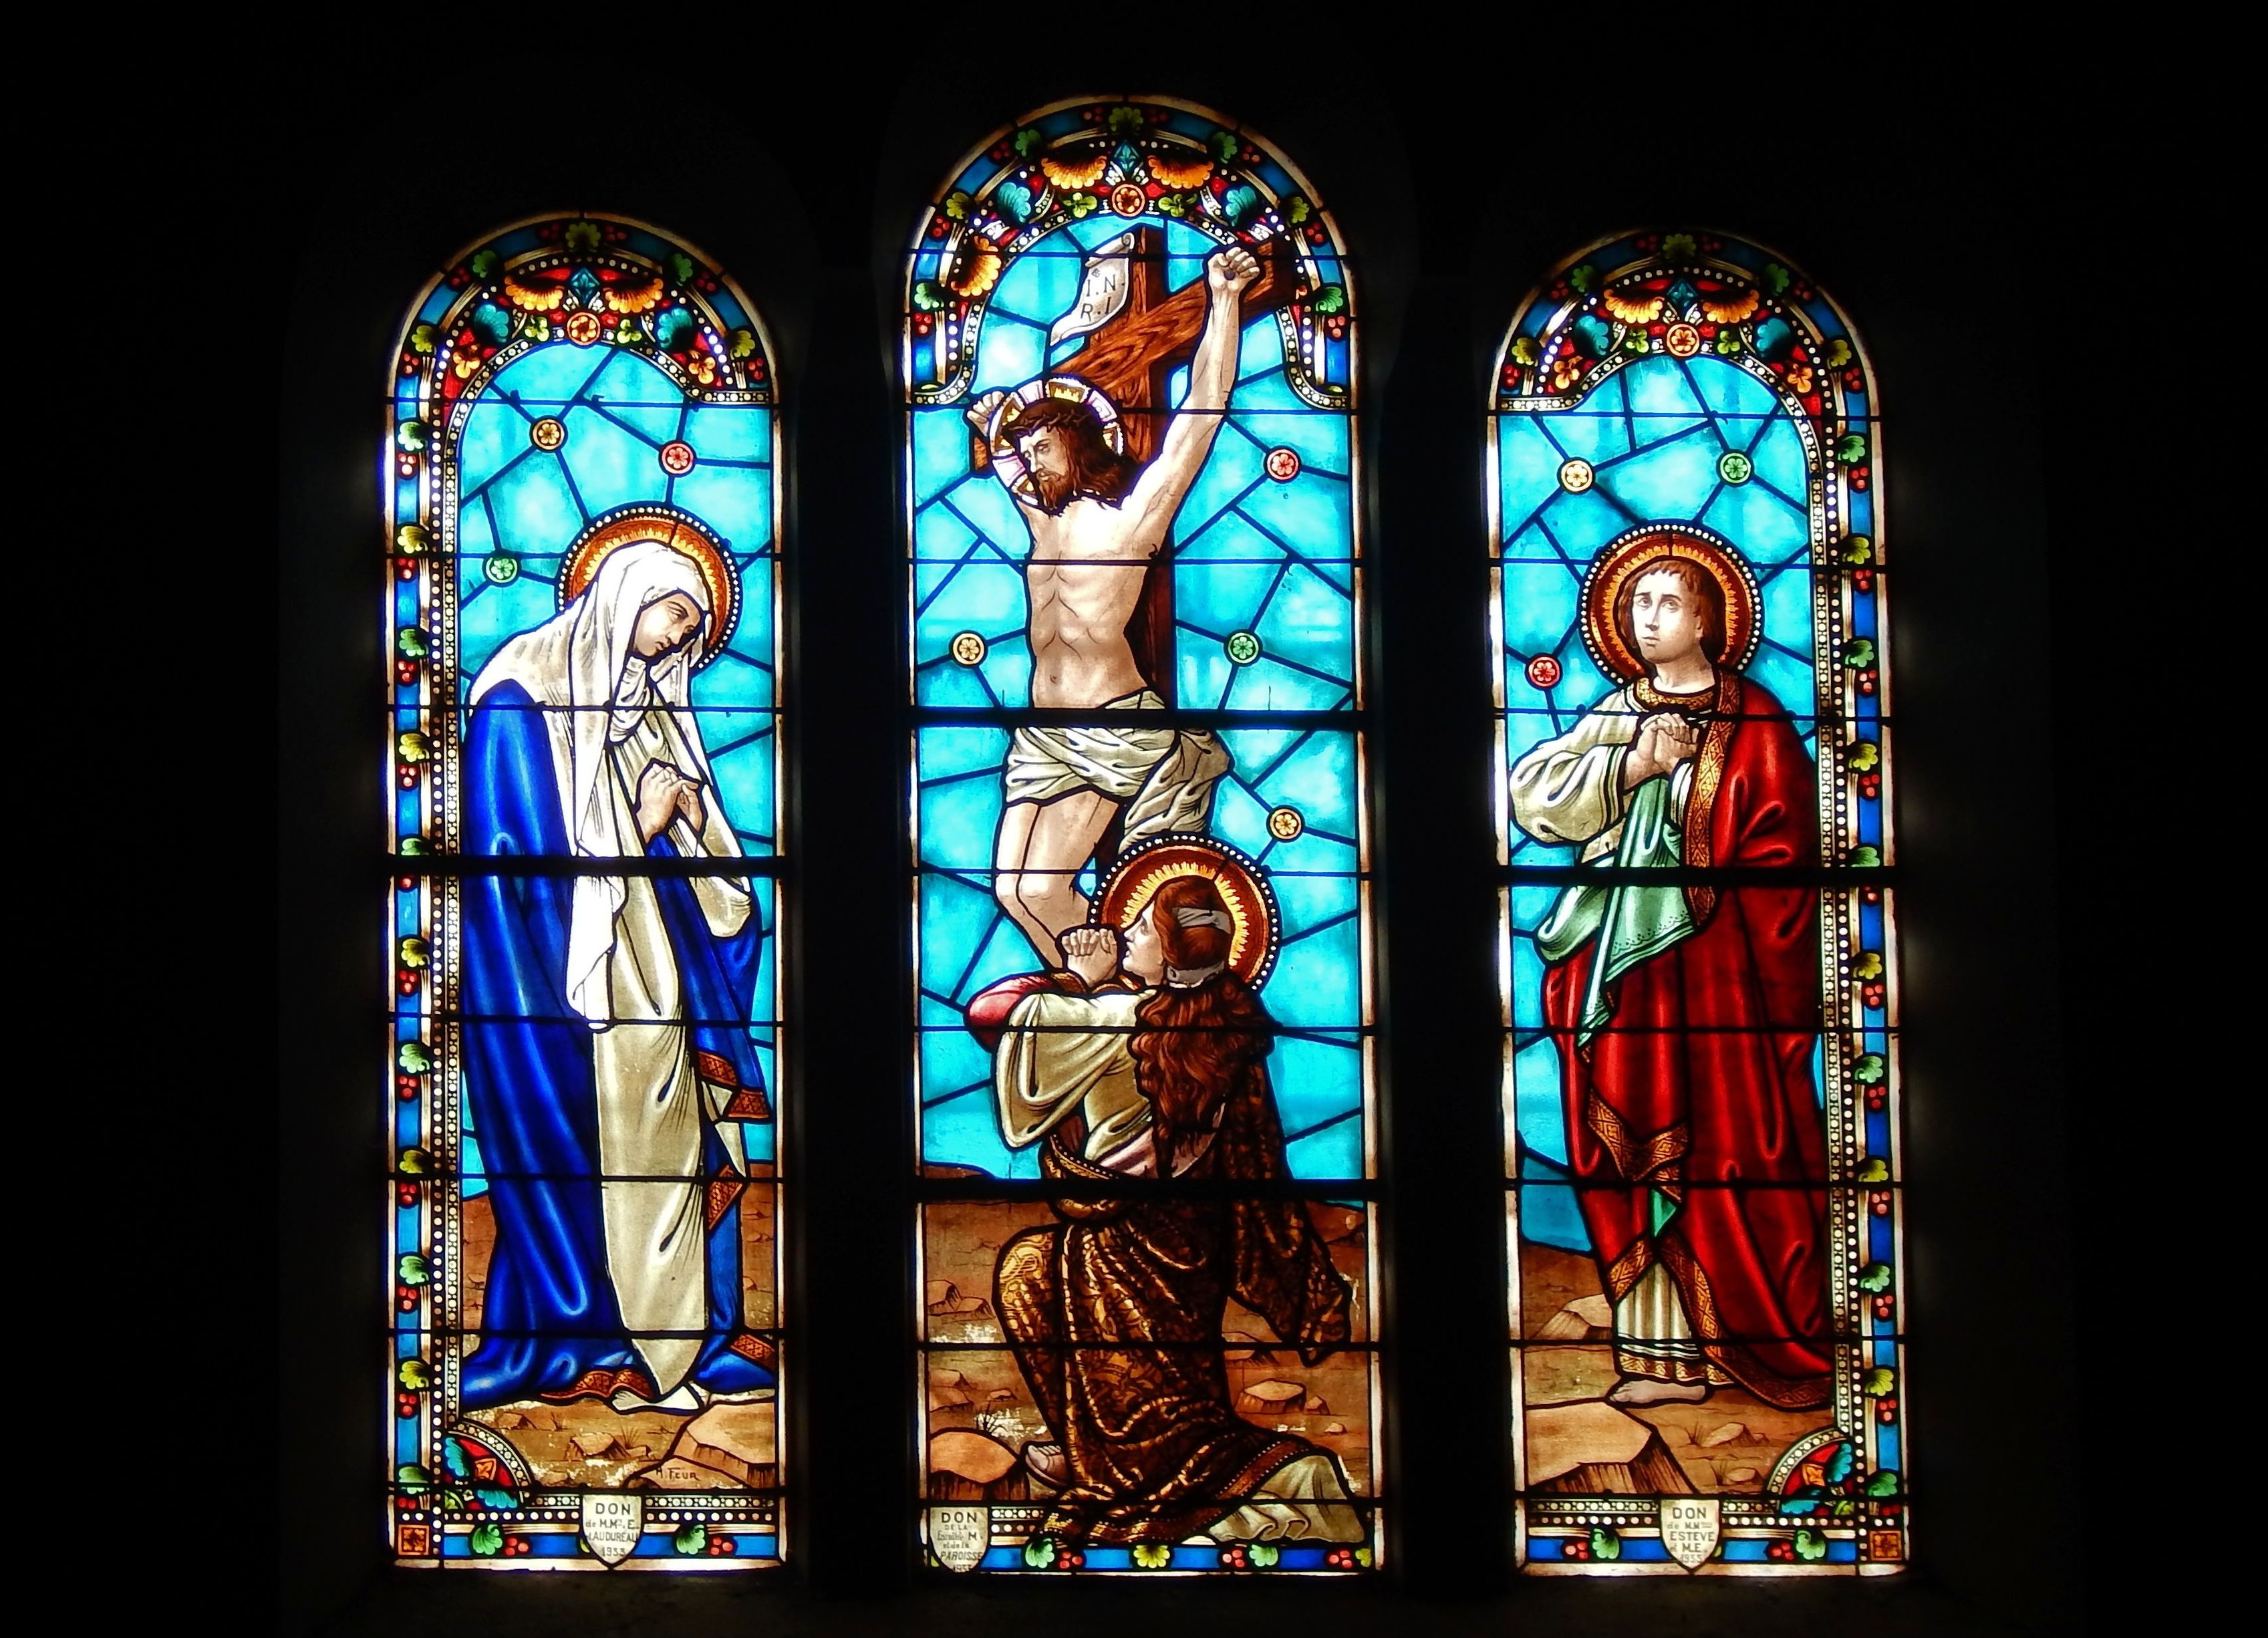 Stained Glass Window in a Church